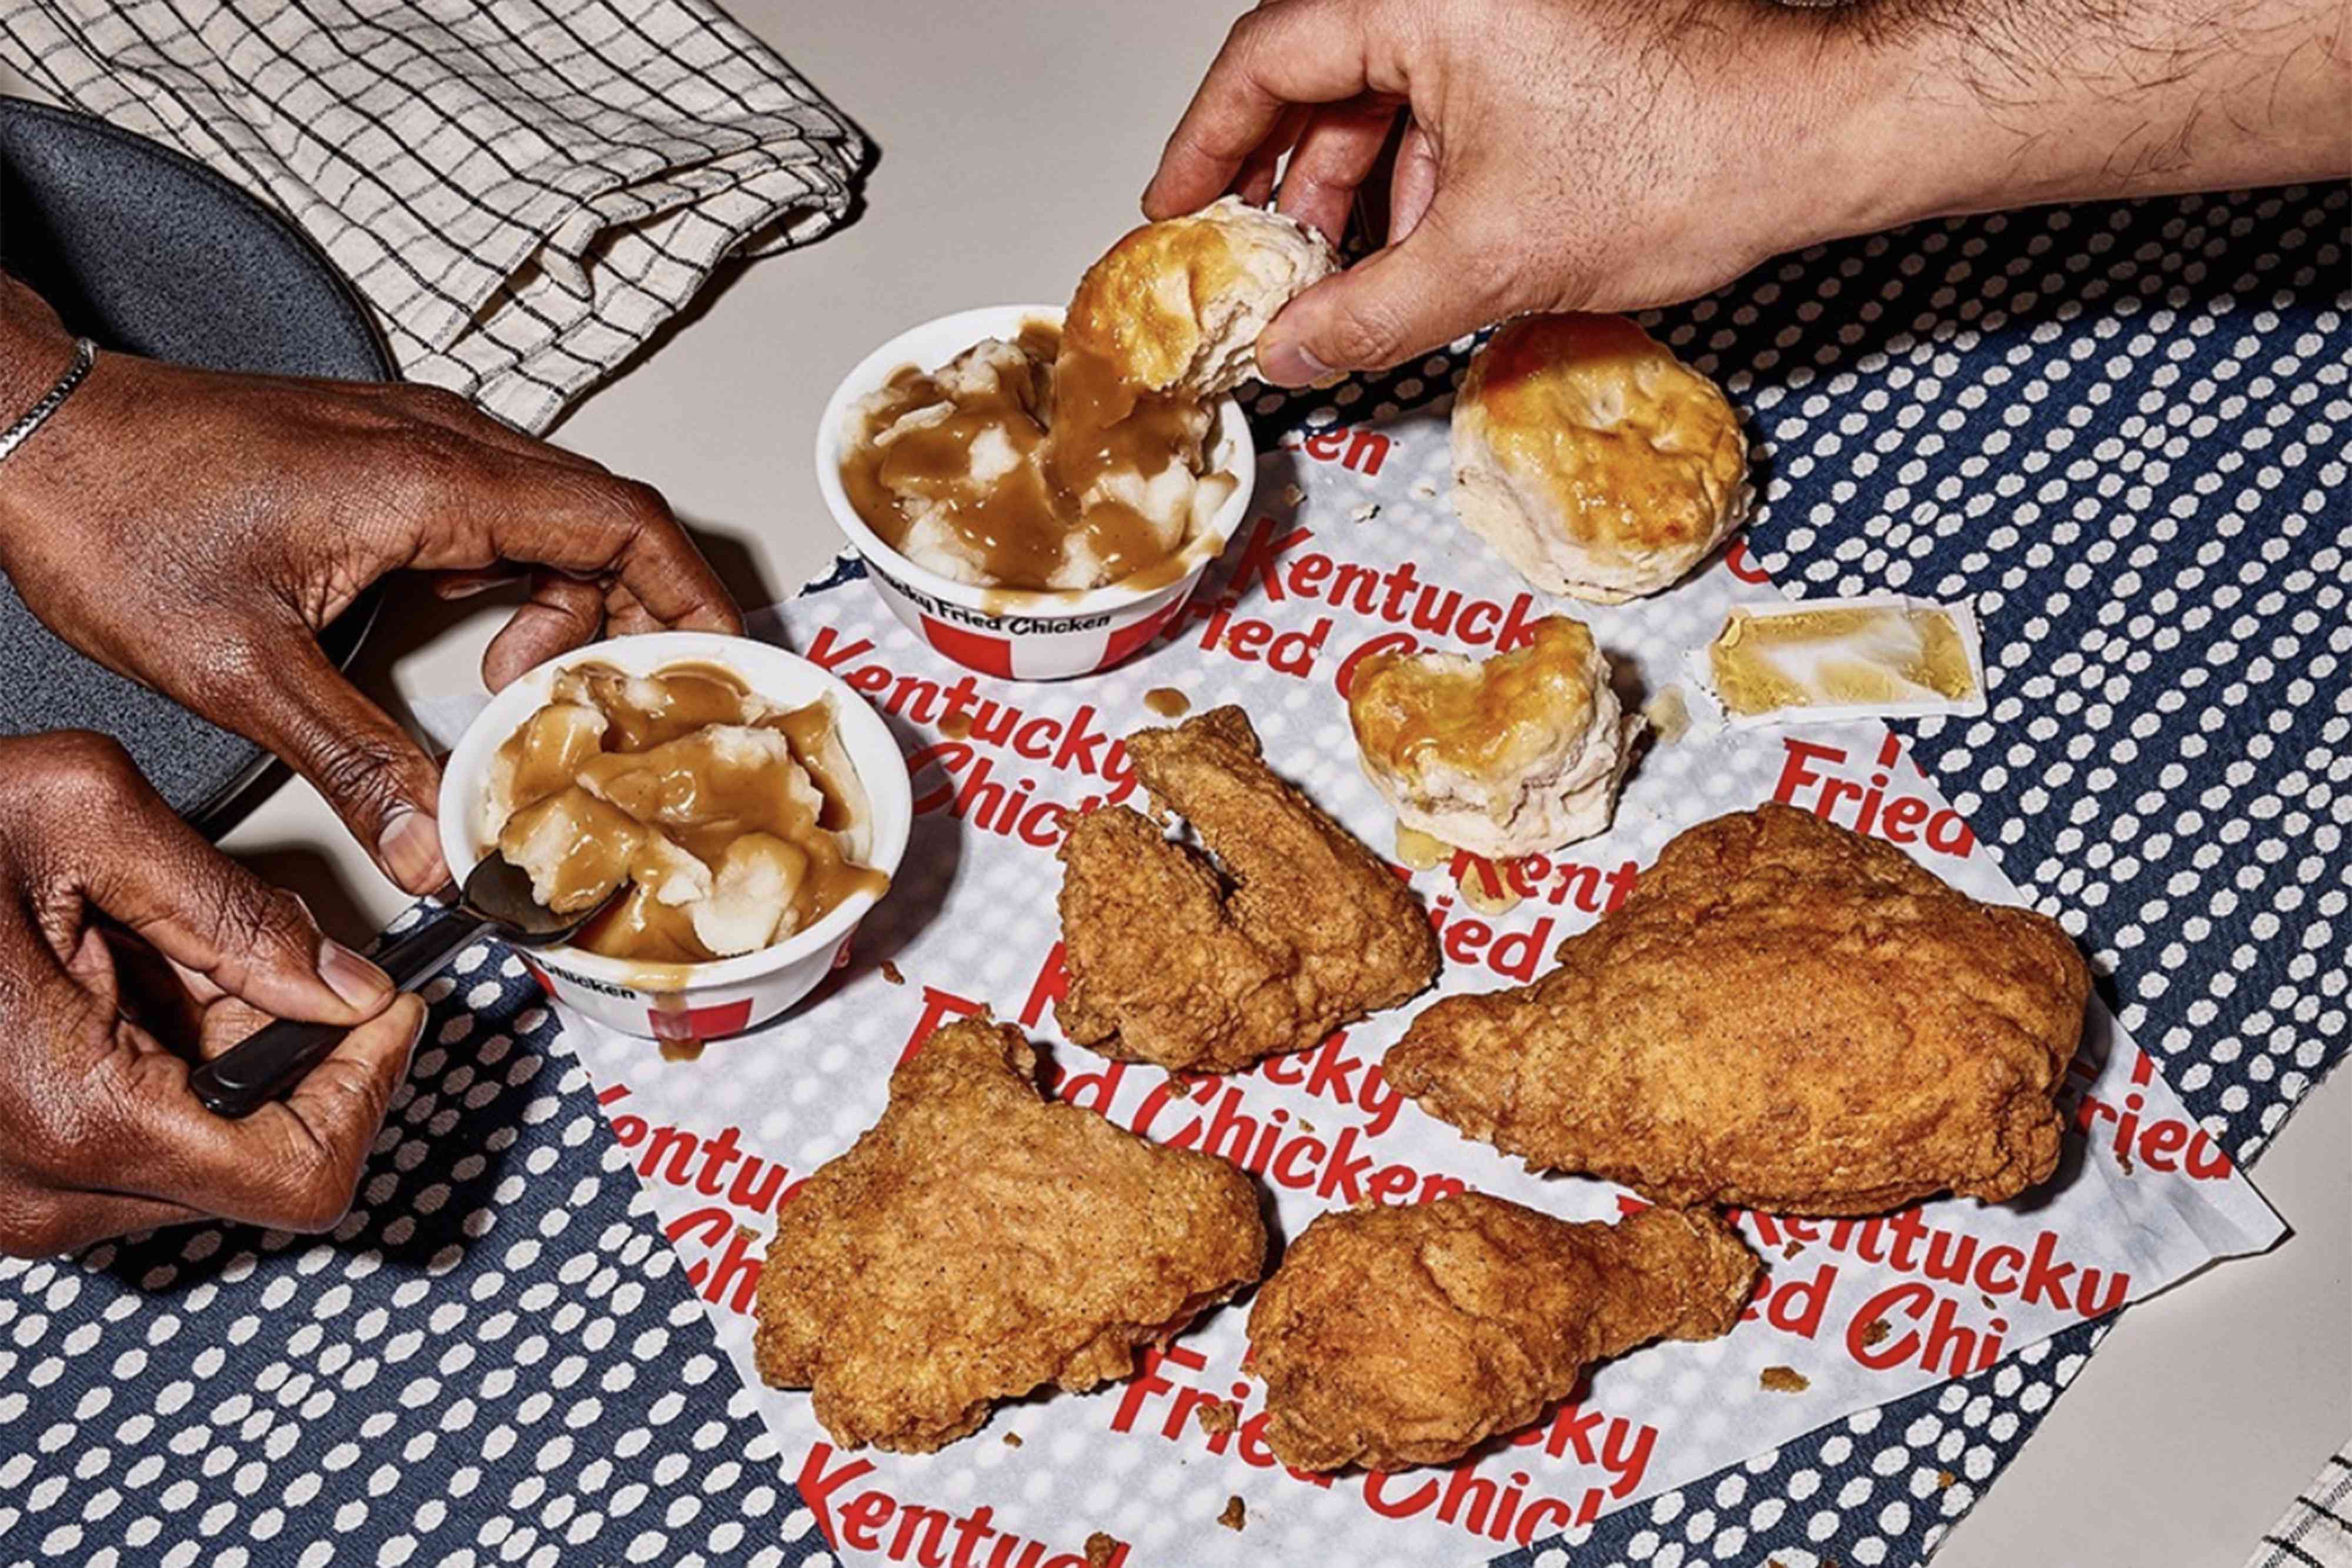 kfc just added some seriously affordable meal deals to its menu